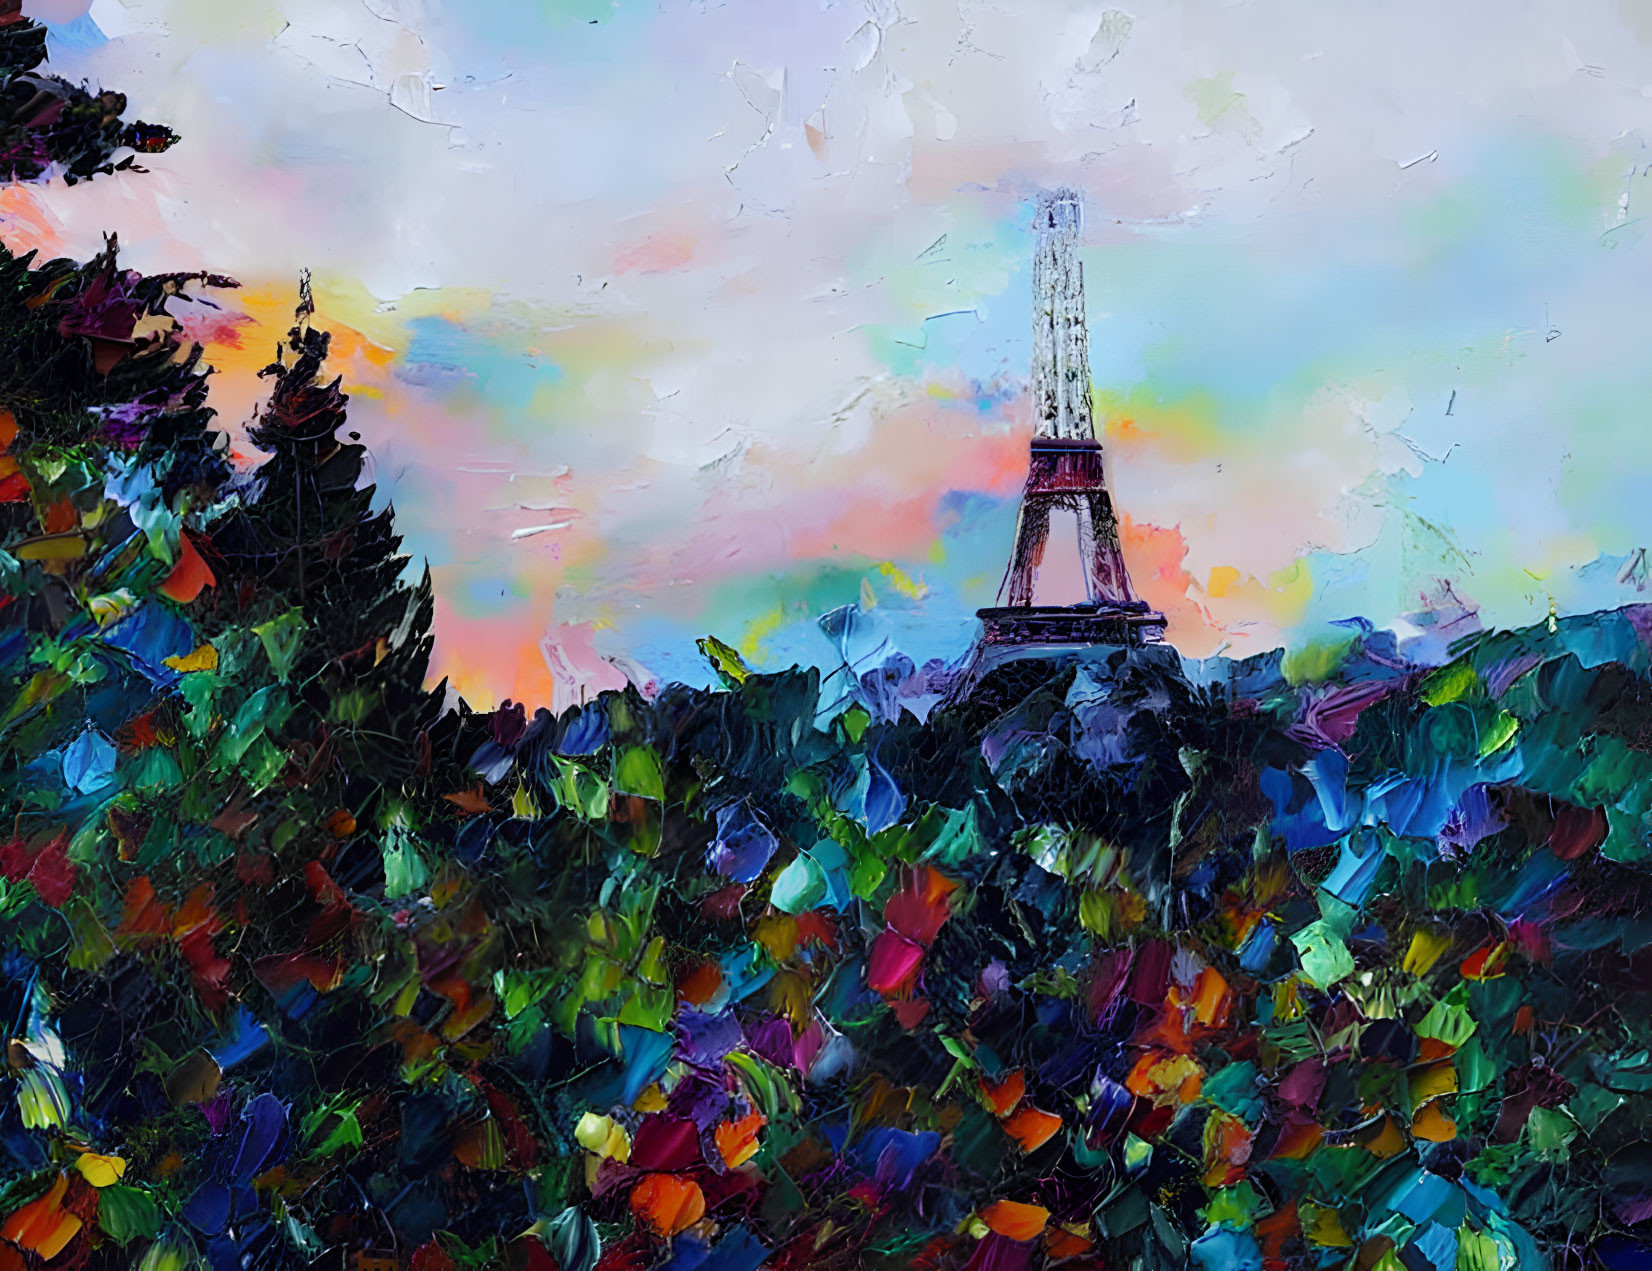 Vibrant Impressionist Eiffel Tower Painting with Colorful Foliage